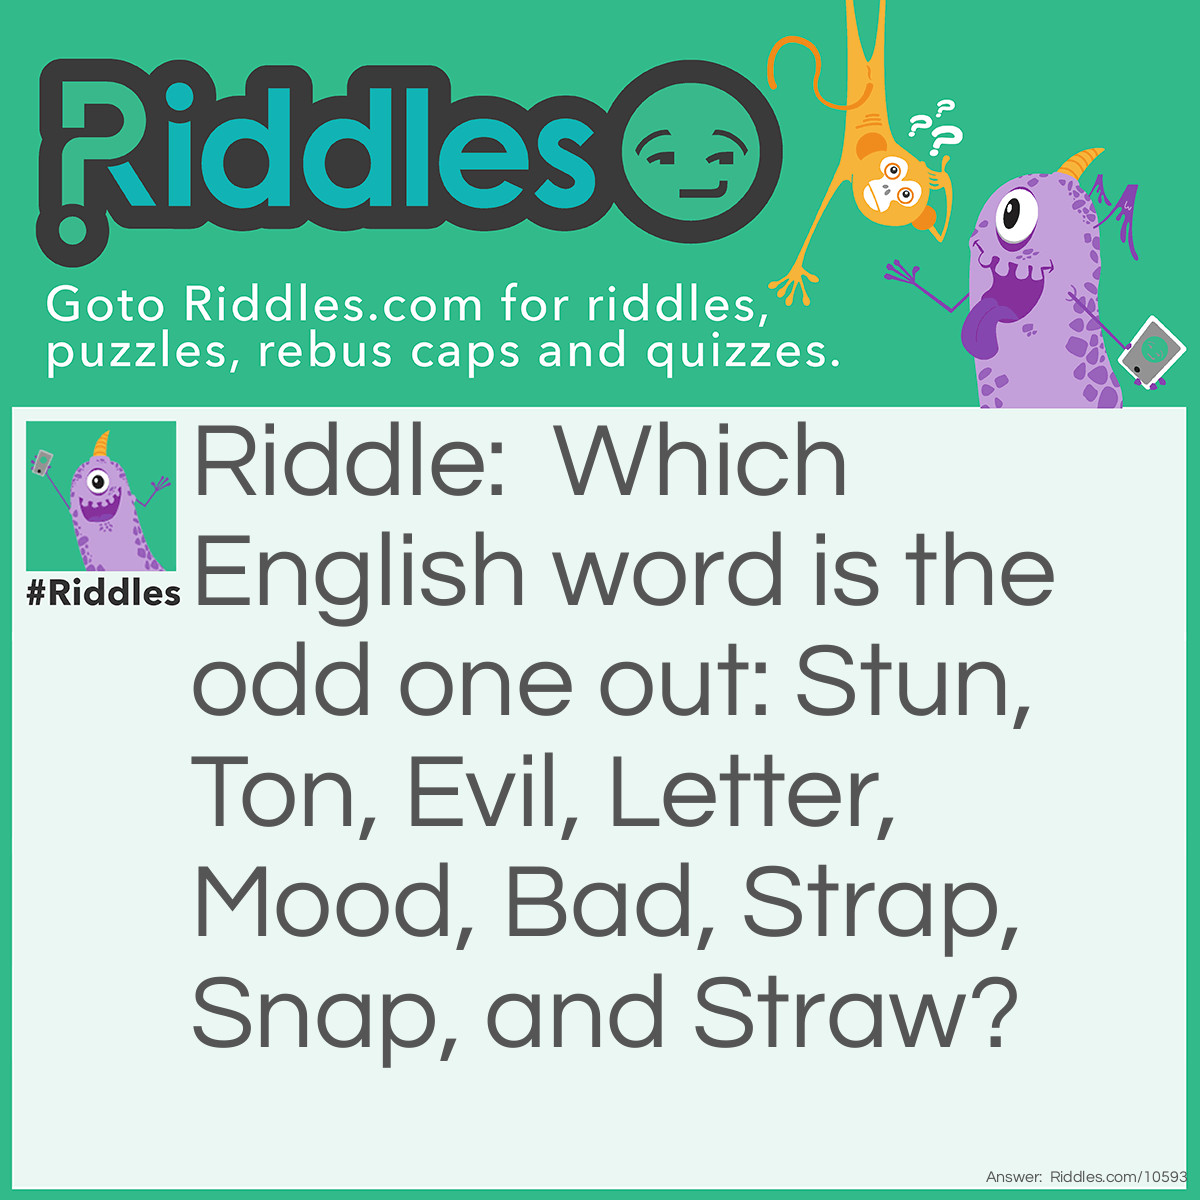 Riddle: Which English word is the odd one out: Stun, Ton, Evil, Letter, Mood, Bad, Strap, Snap, and Straw? Answer: Letter as it is the only one that does not spell another word when it’s written backward.